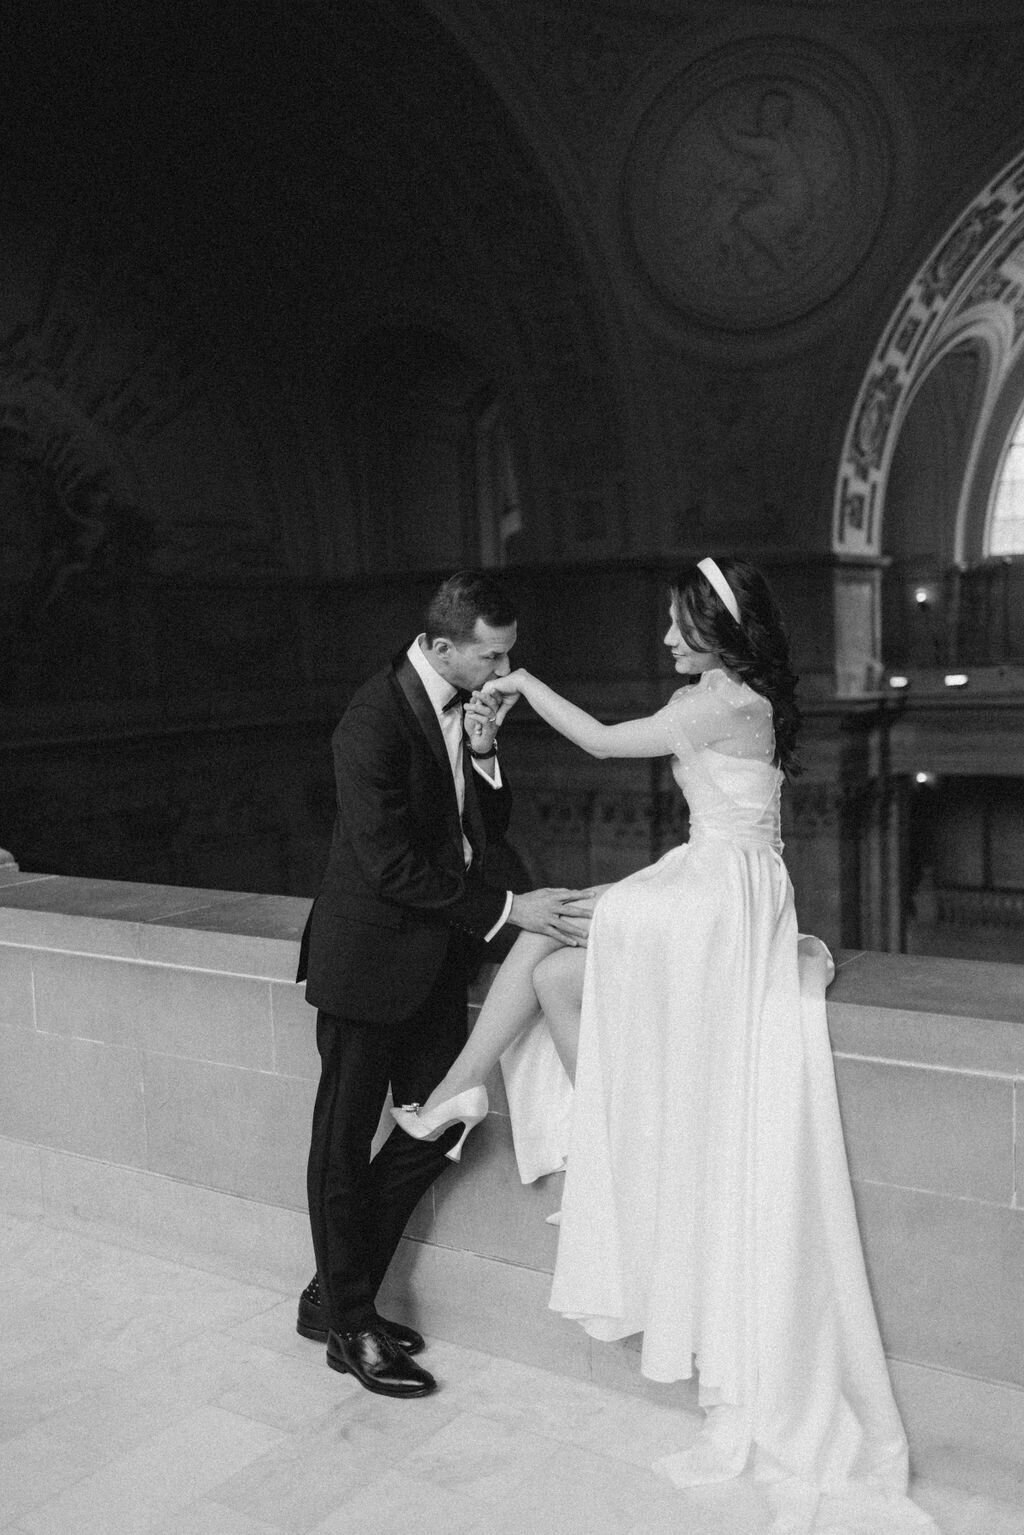 A black and white photo of a bride and groom on a grand staircase in San Francisco City Hall, with the groom kissing the bride's hand. The setting features elegant architectural details.